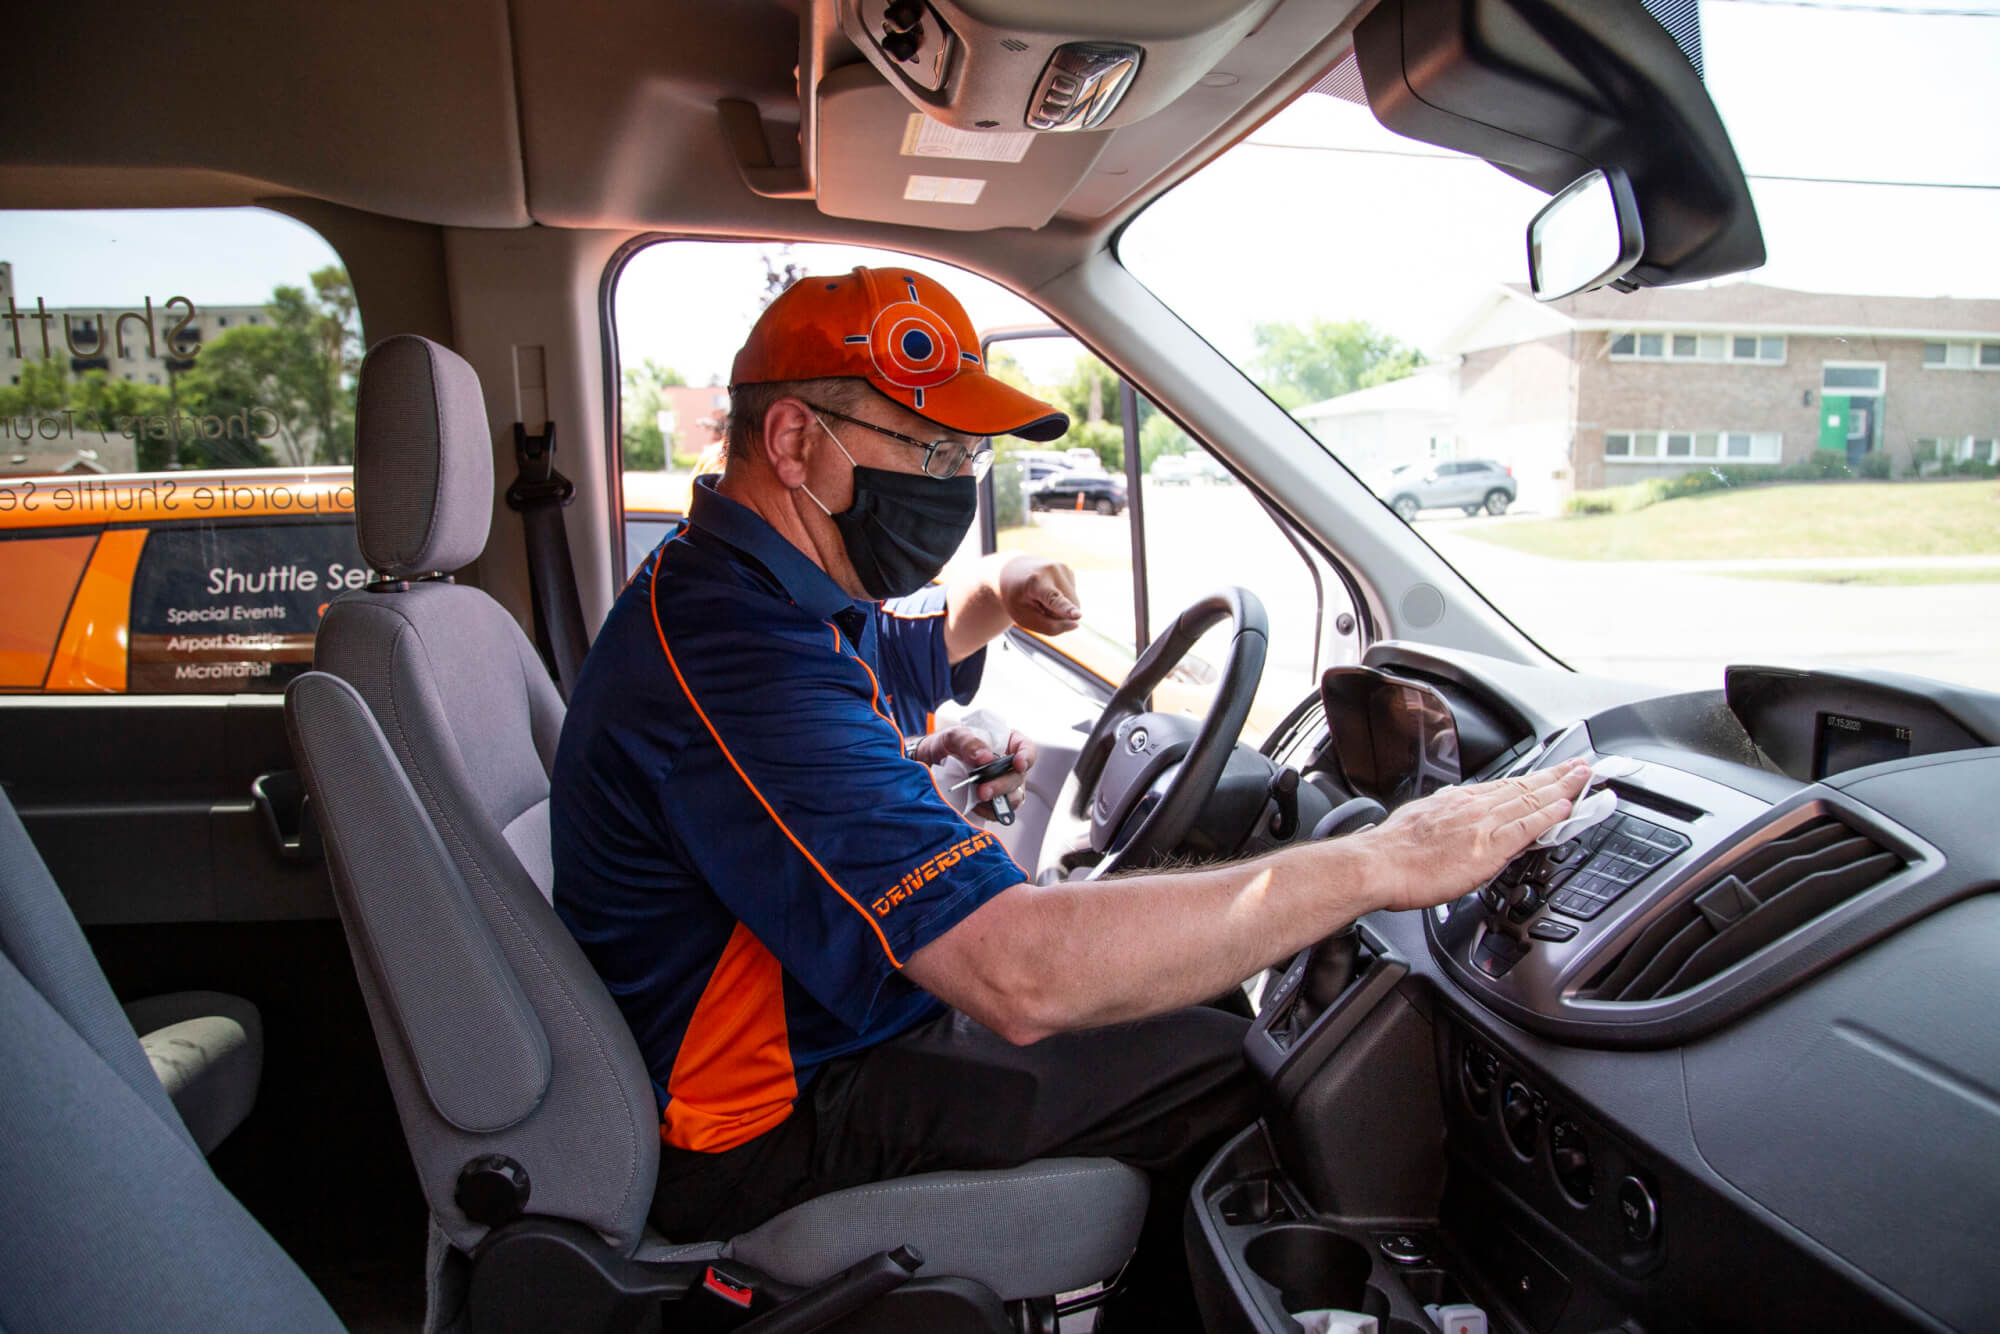 The Significant Demand for Driverseat’s Services Results In Amazing Chauffeur Opportunities